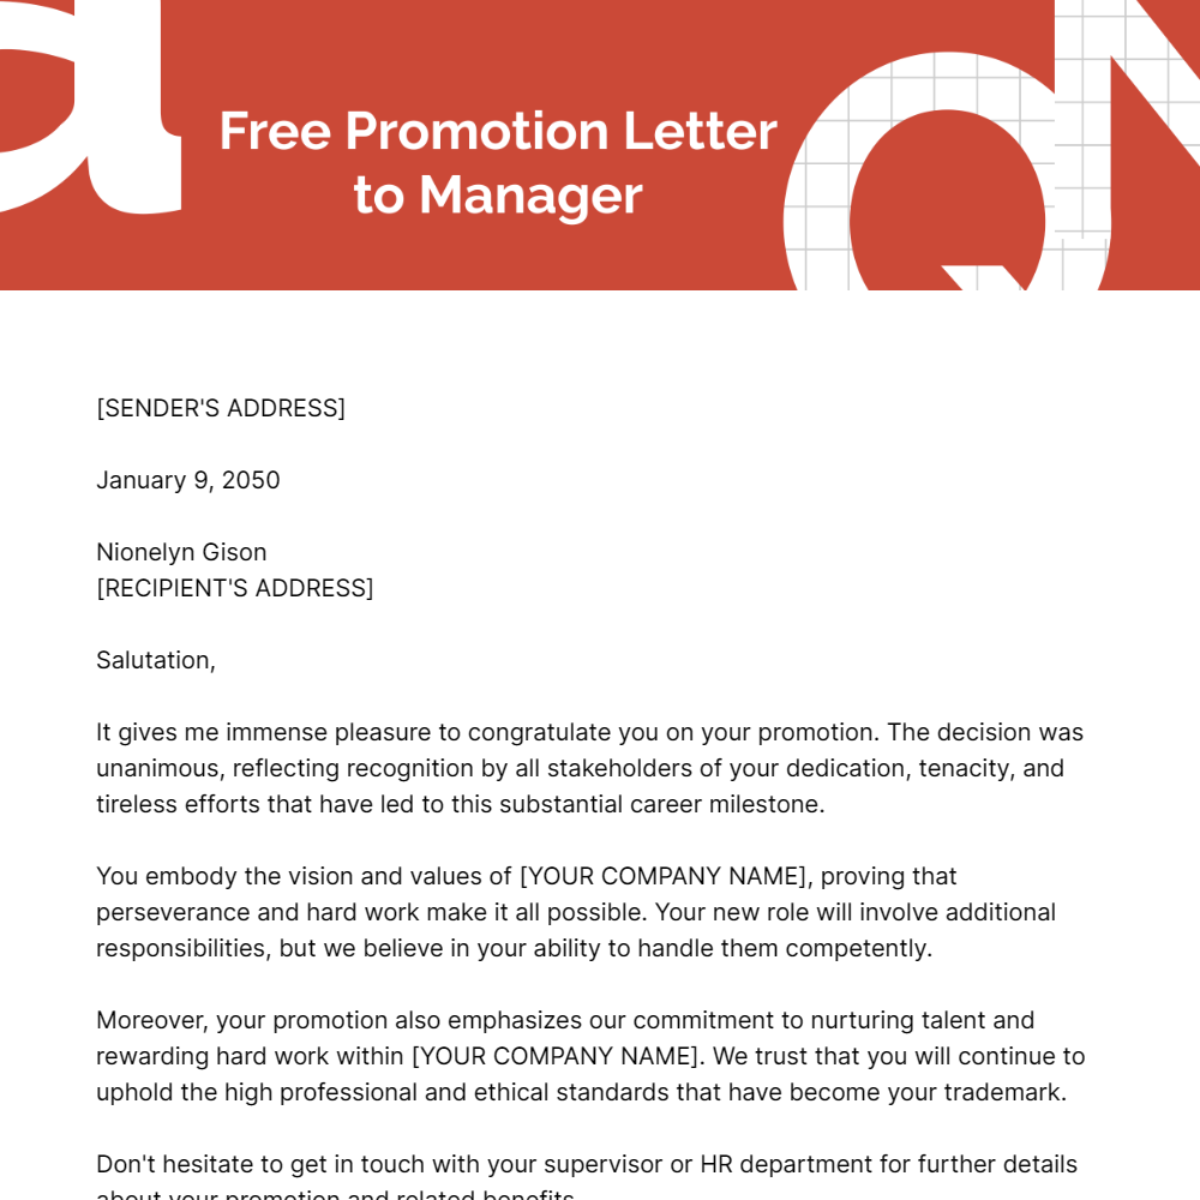 Promotion Letter to Manager Template